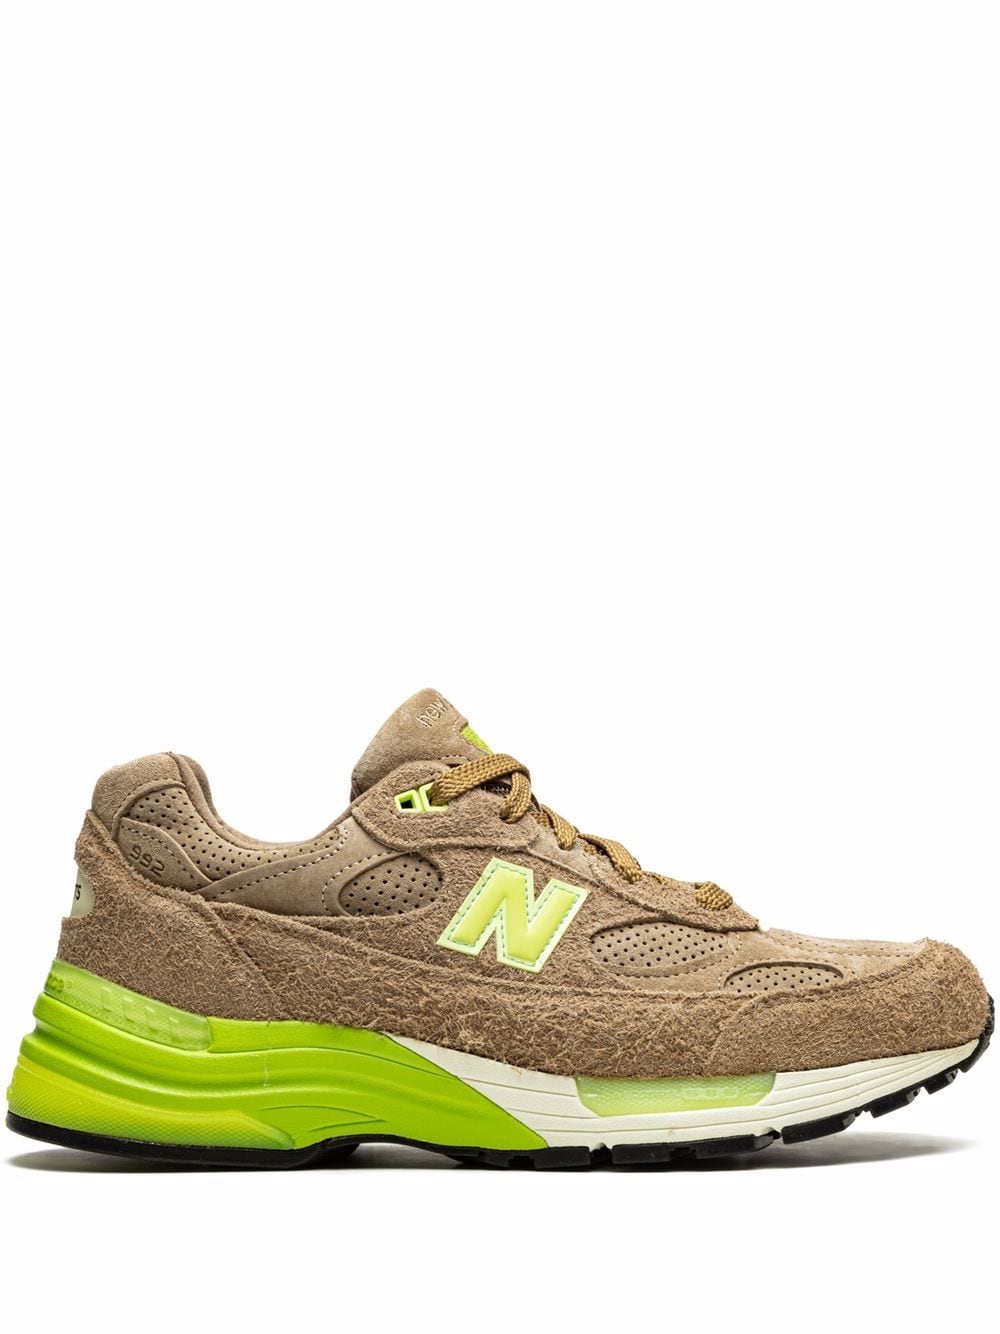 New Balance x Concepts 992 Made in USA sneakers - Brown